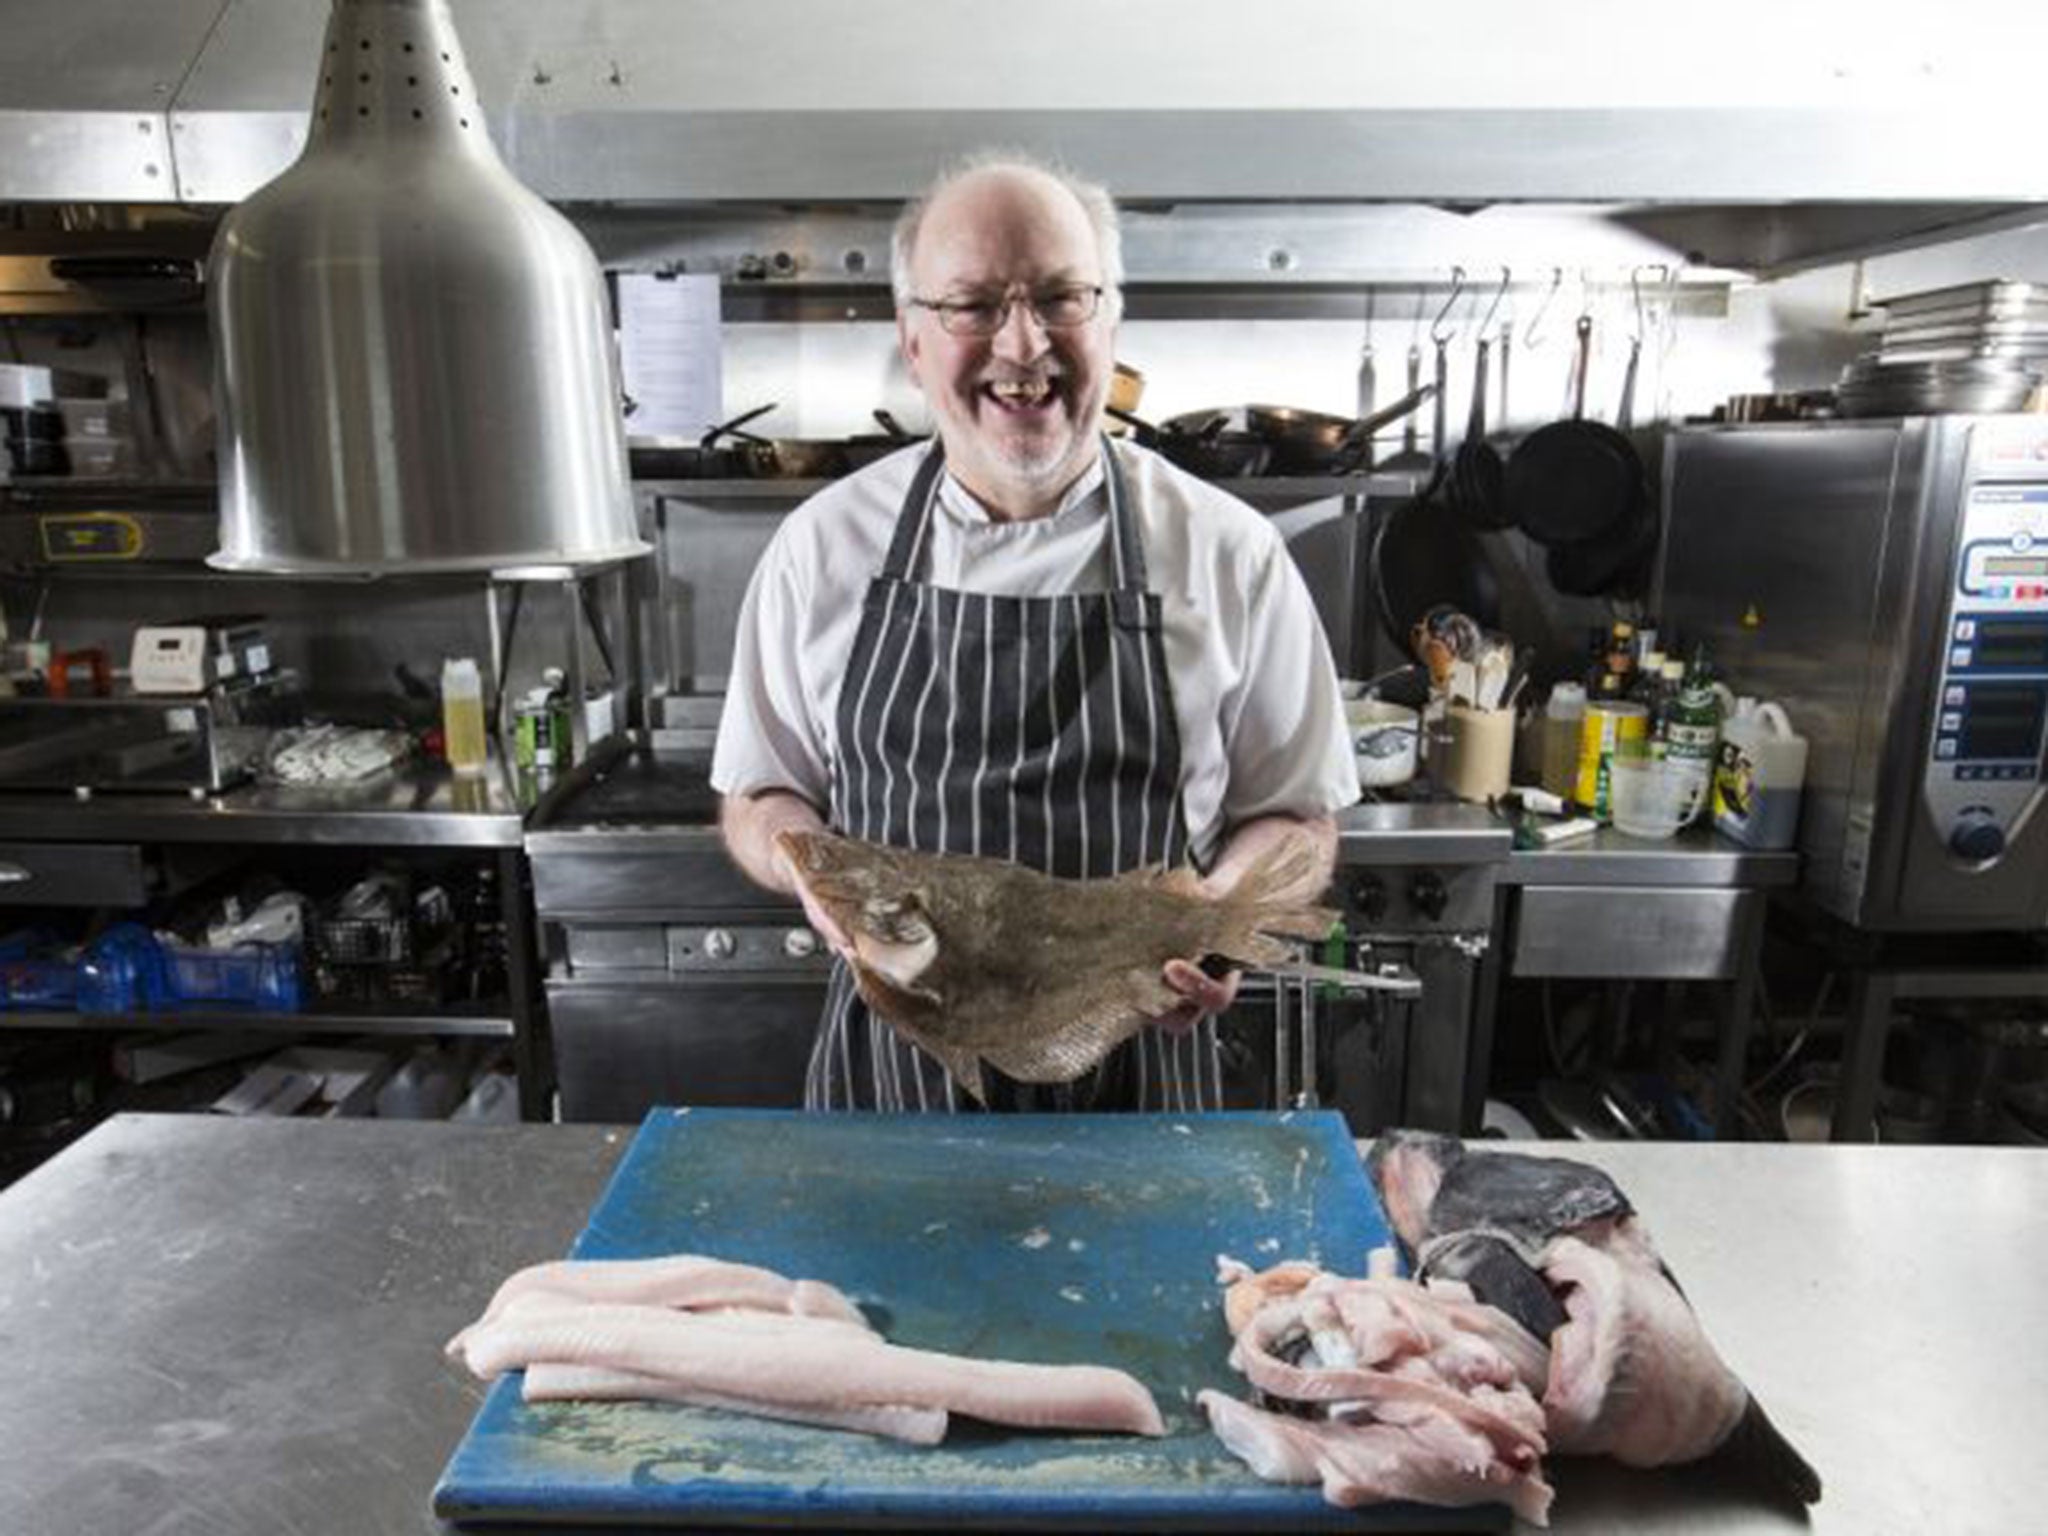 Chef Jim Cowie at The Captain’s Galley in Scrabster, Caithness